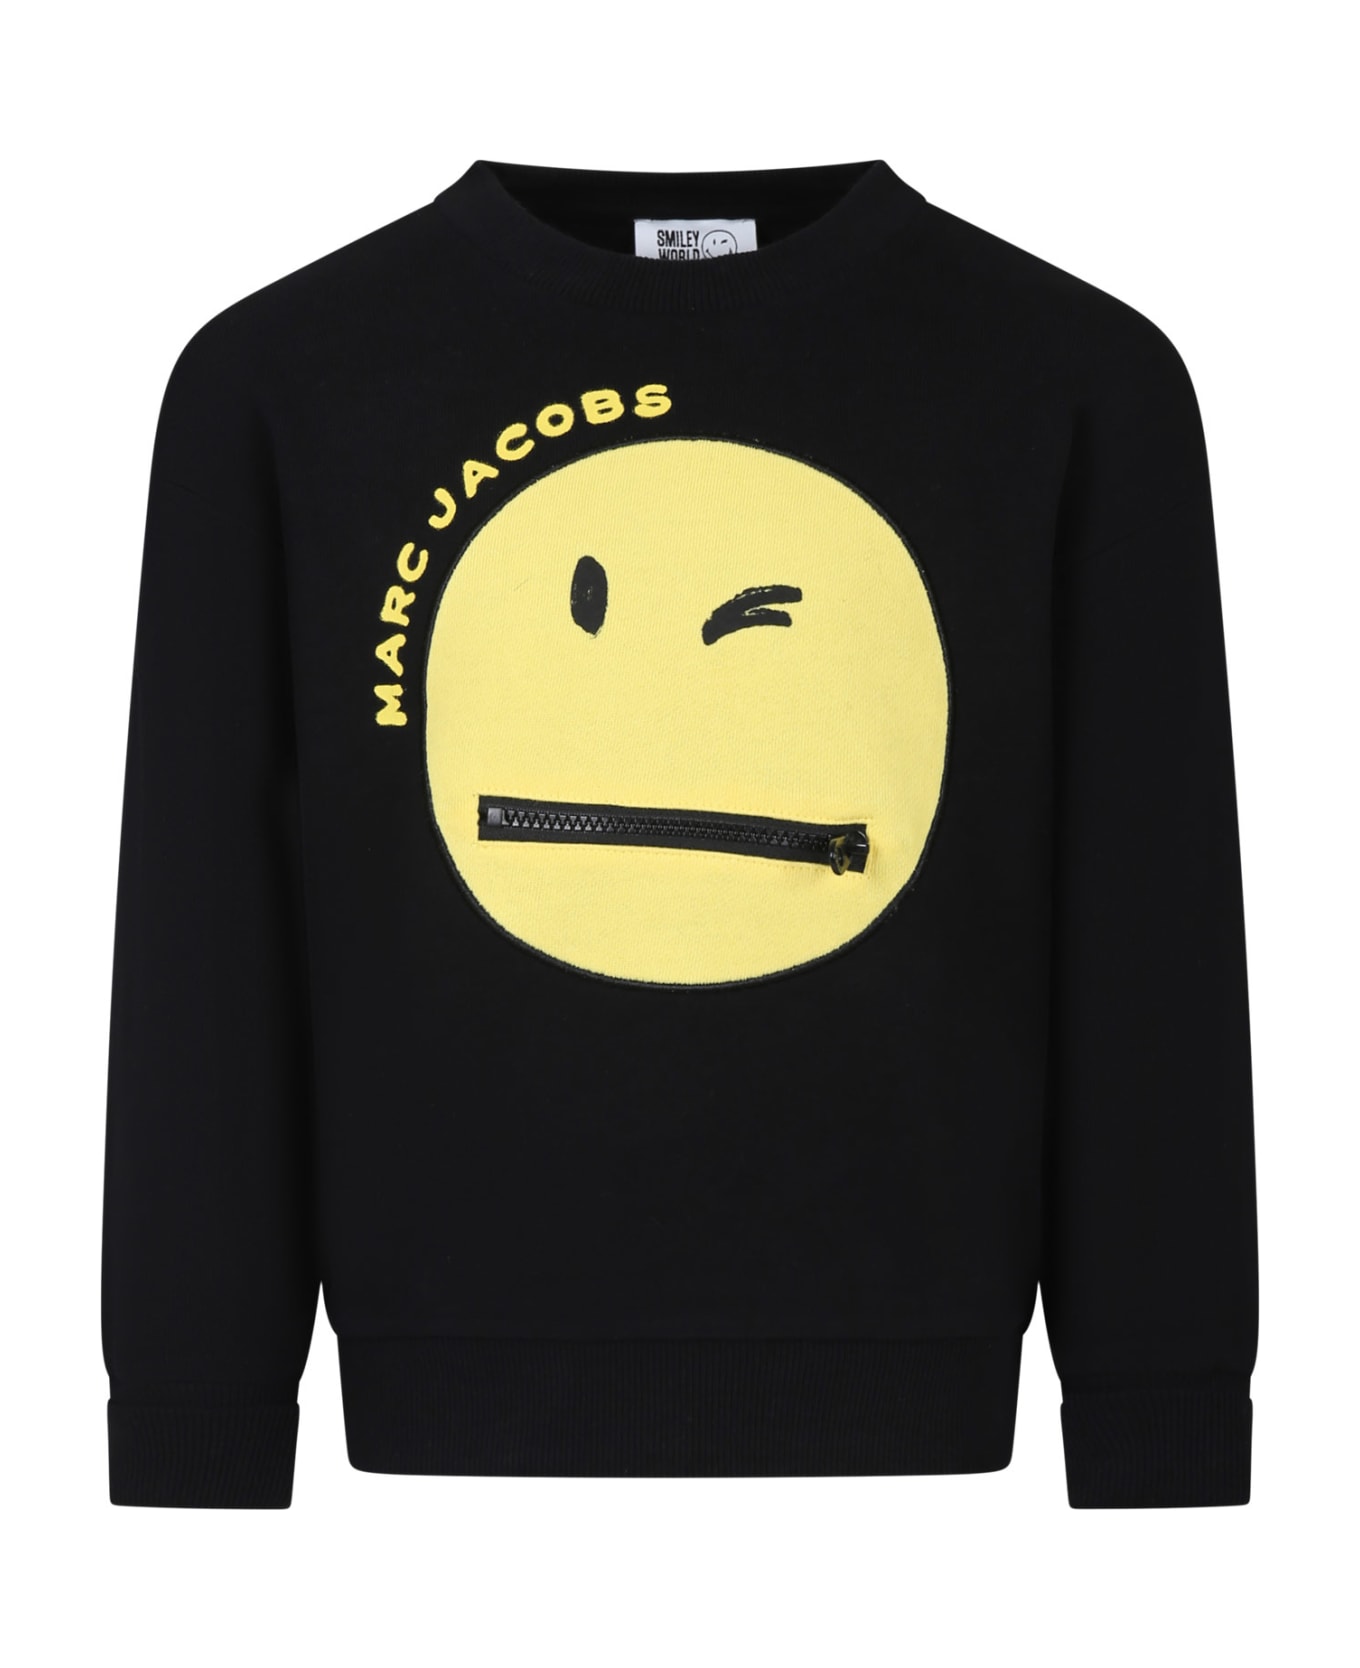 Marc Jacobs Black Sweatshirt For Kids With Smiley And Logo - Black